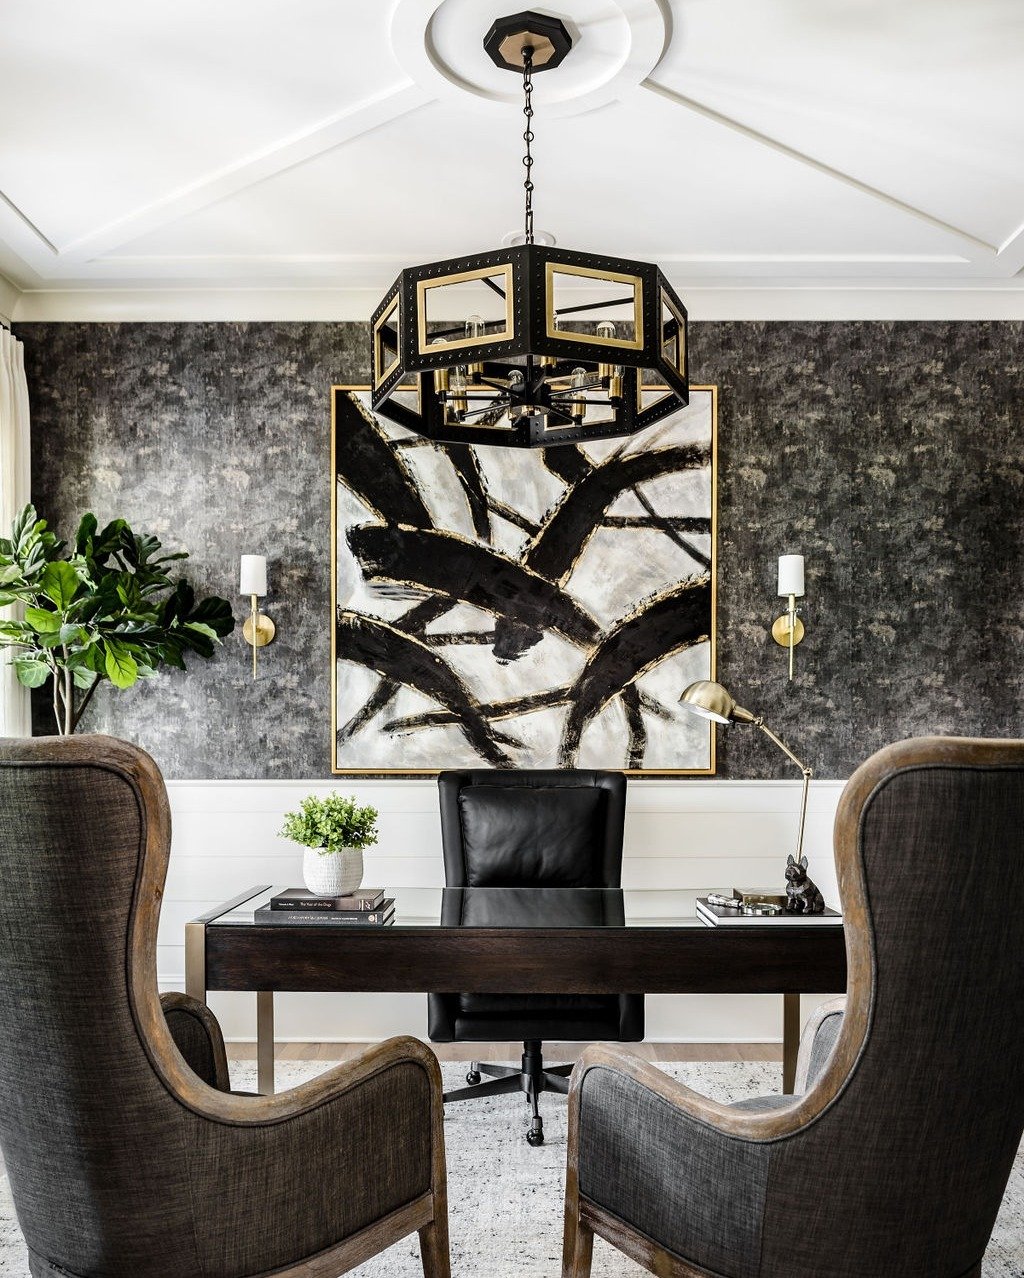 Creating a C-suite office design that hits your sweet spot&hellip;

My clients want their home offices to be an elevated representation of their accomplishments, and a reflection of their own distinct personal style. Accordingly, my designs reflect t